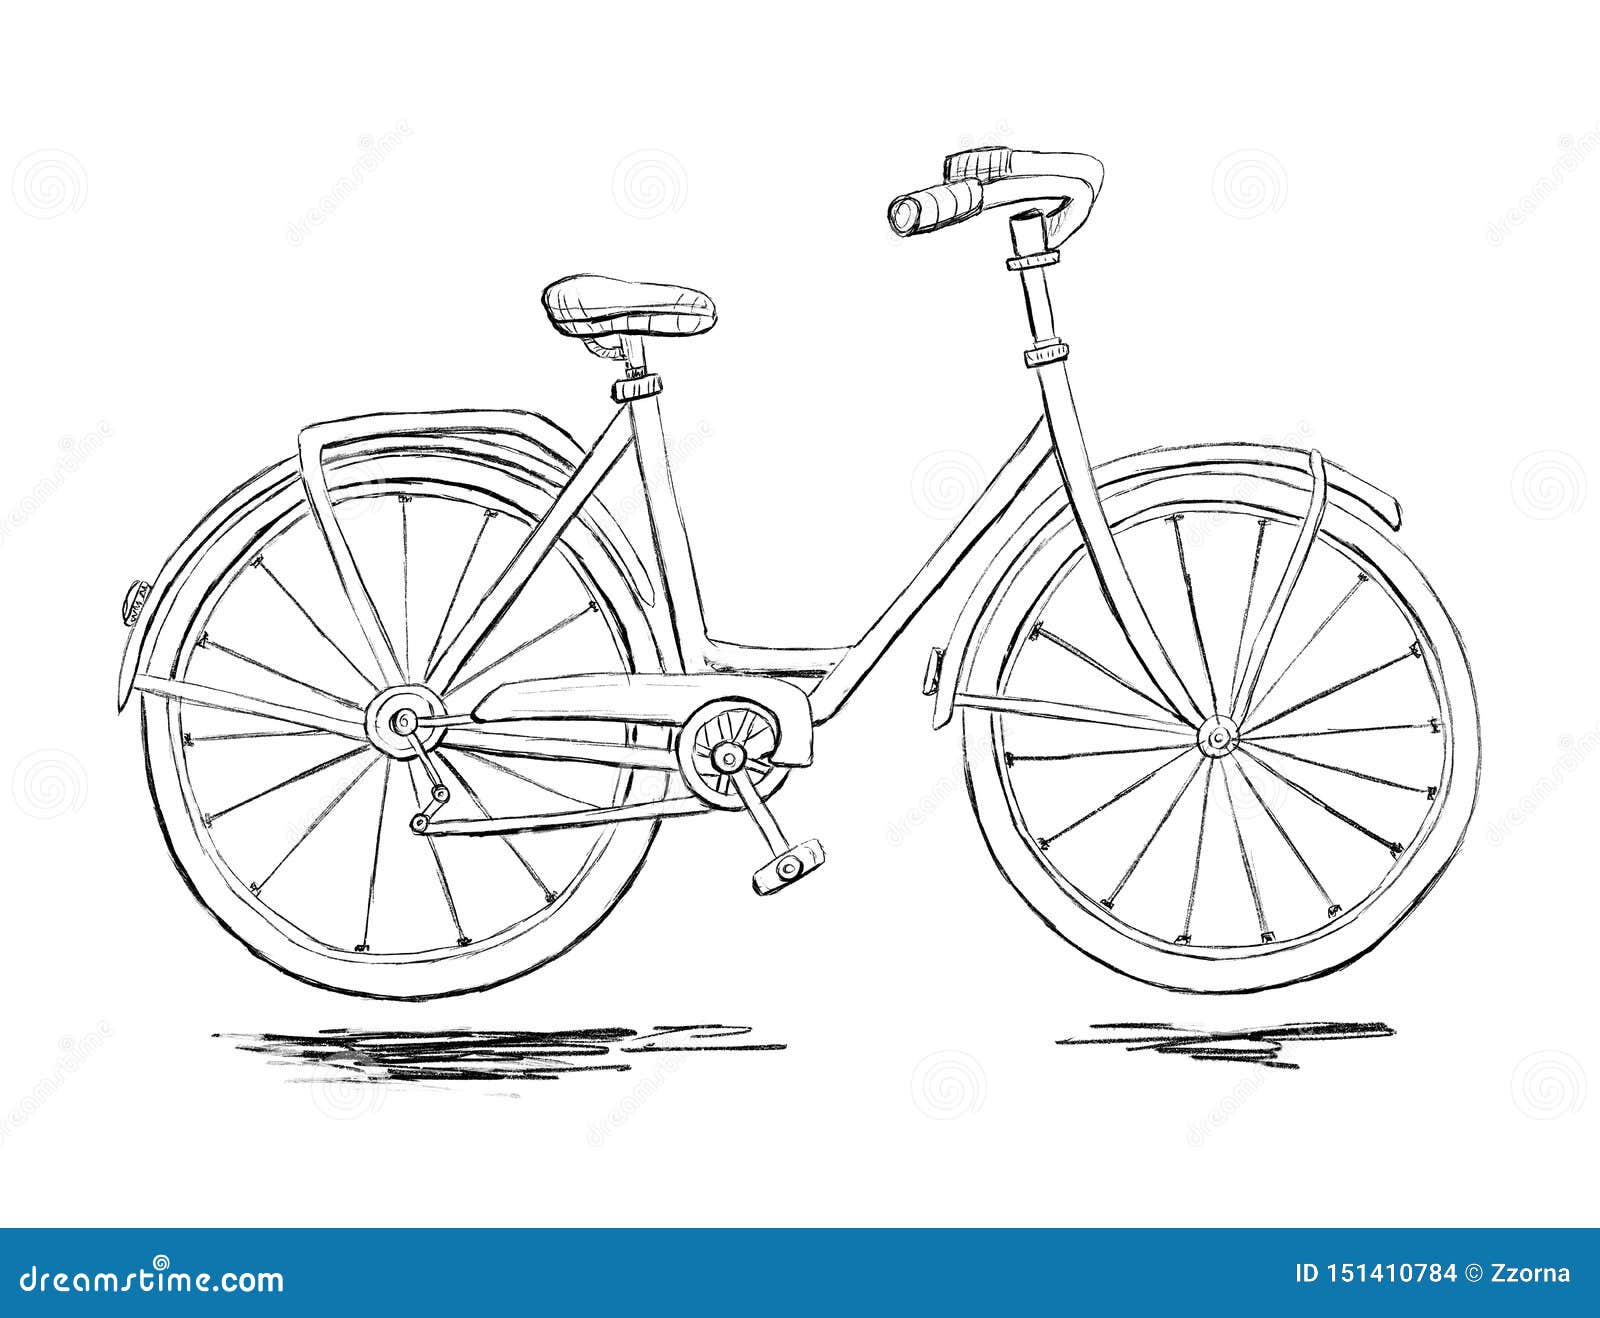 Premium Vector | Drawing tutorial for kids. easy level. education sheets.  how to draw bicycle